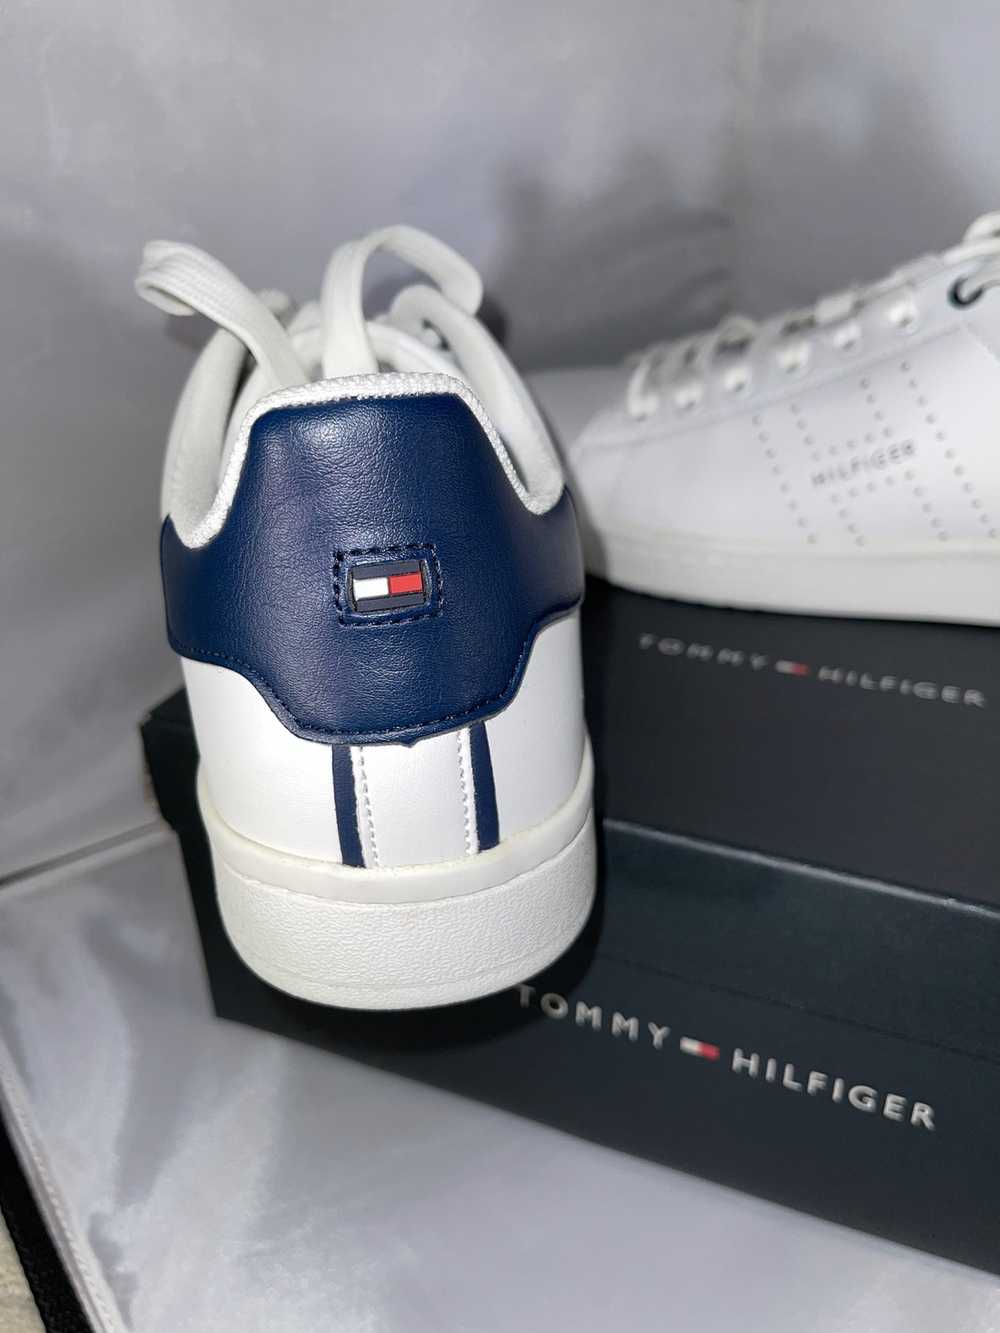 Tommy Hilfiger Tommy Hilfiger Leather Sneakers - image 3